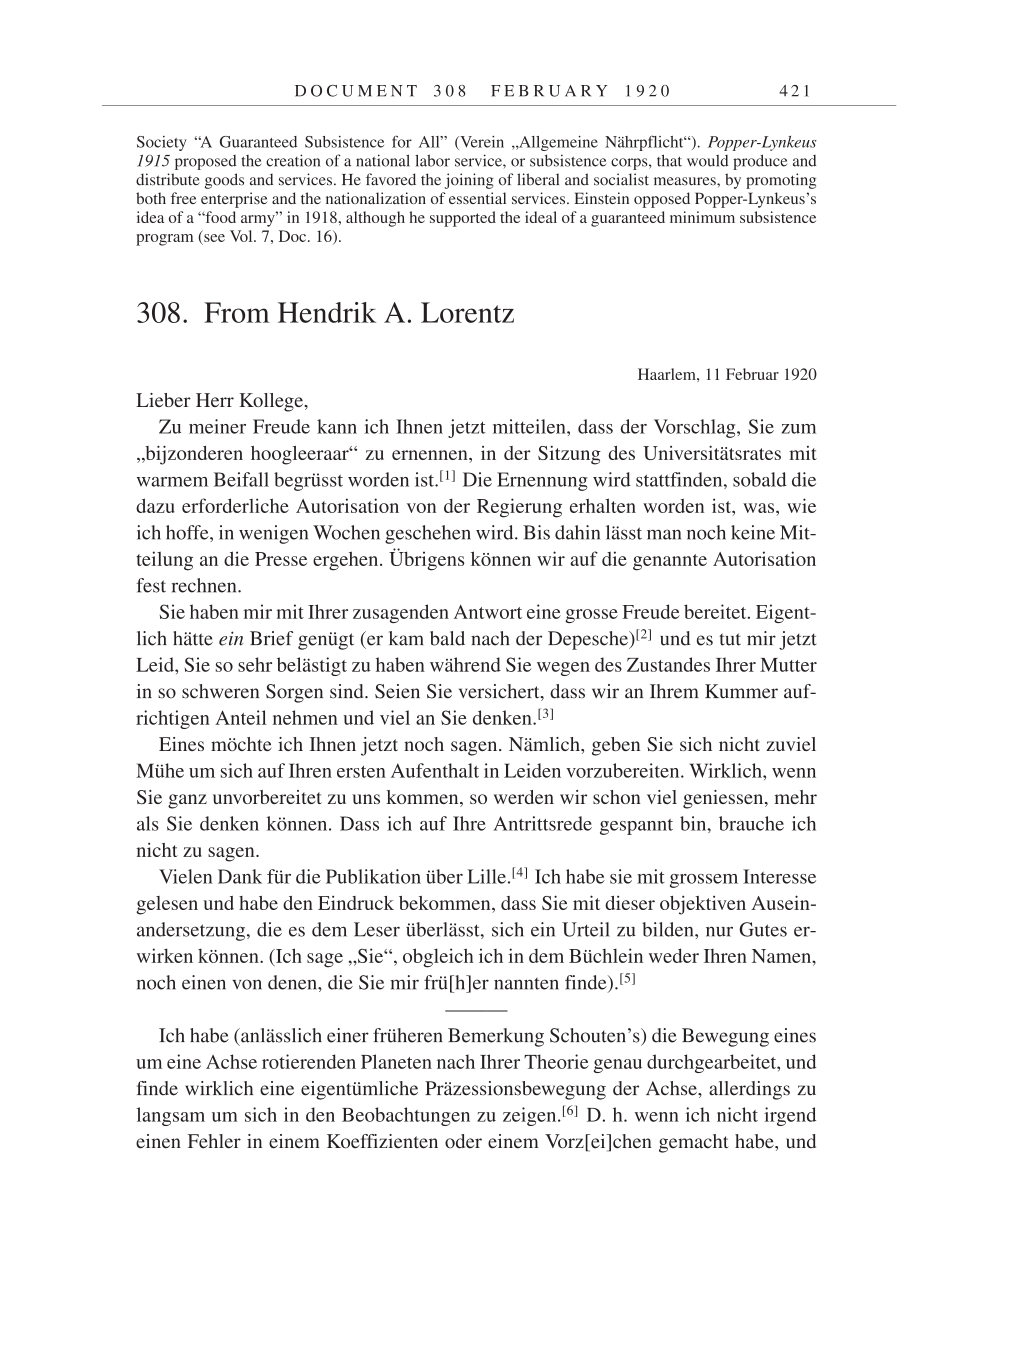 Volume 9: The Berlin Years: Correspondence January 1919-April 1920 page 421